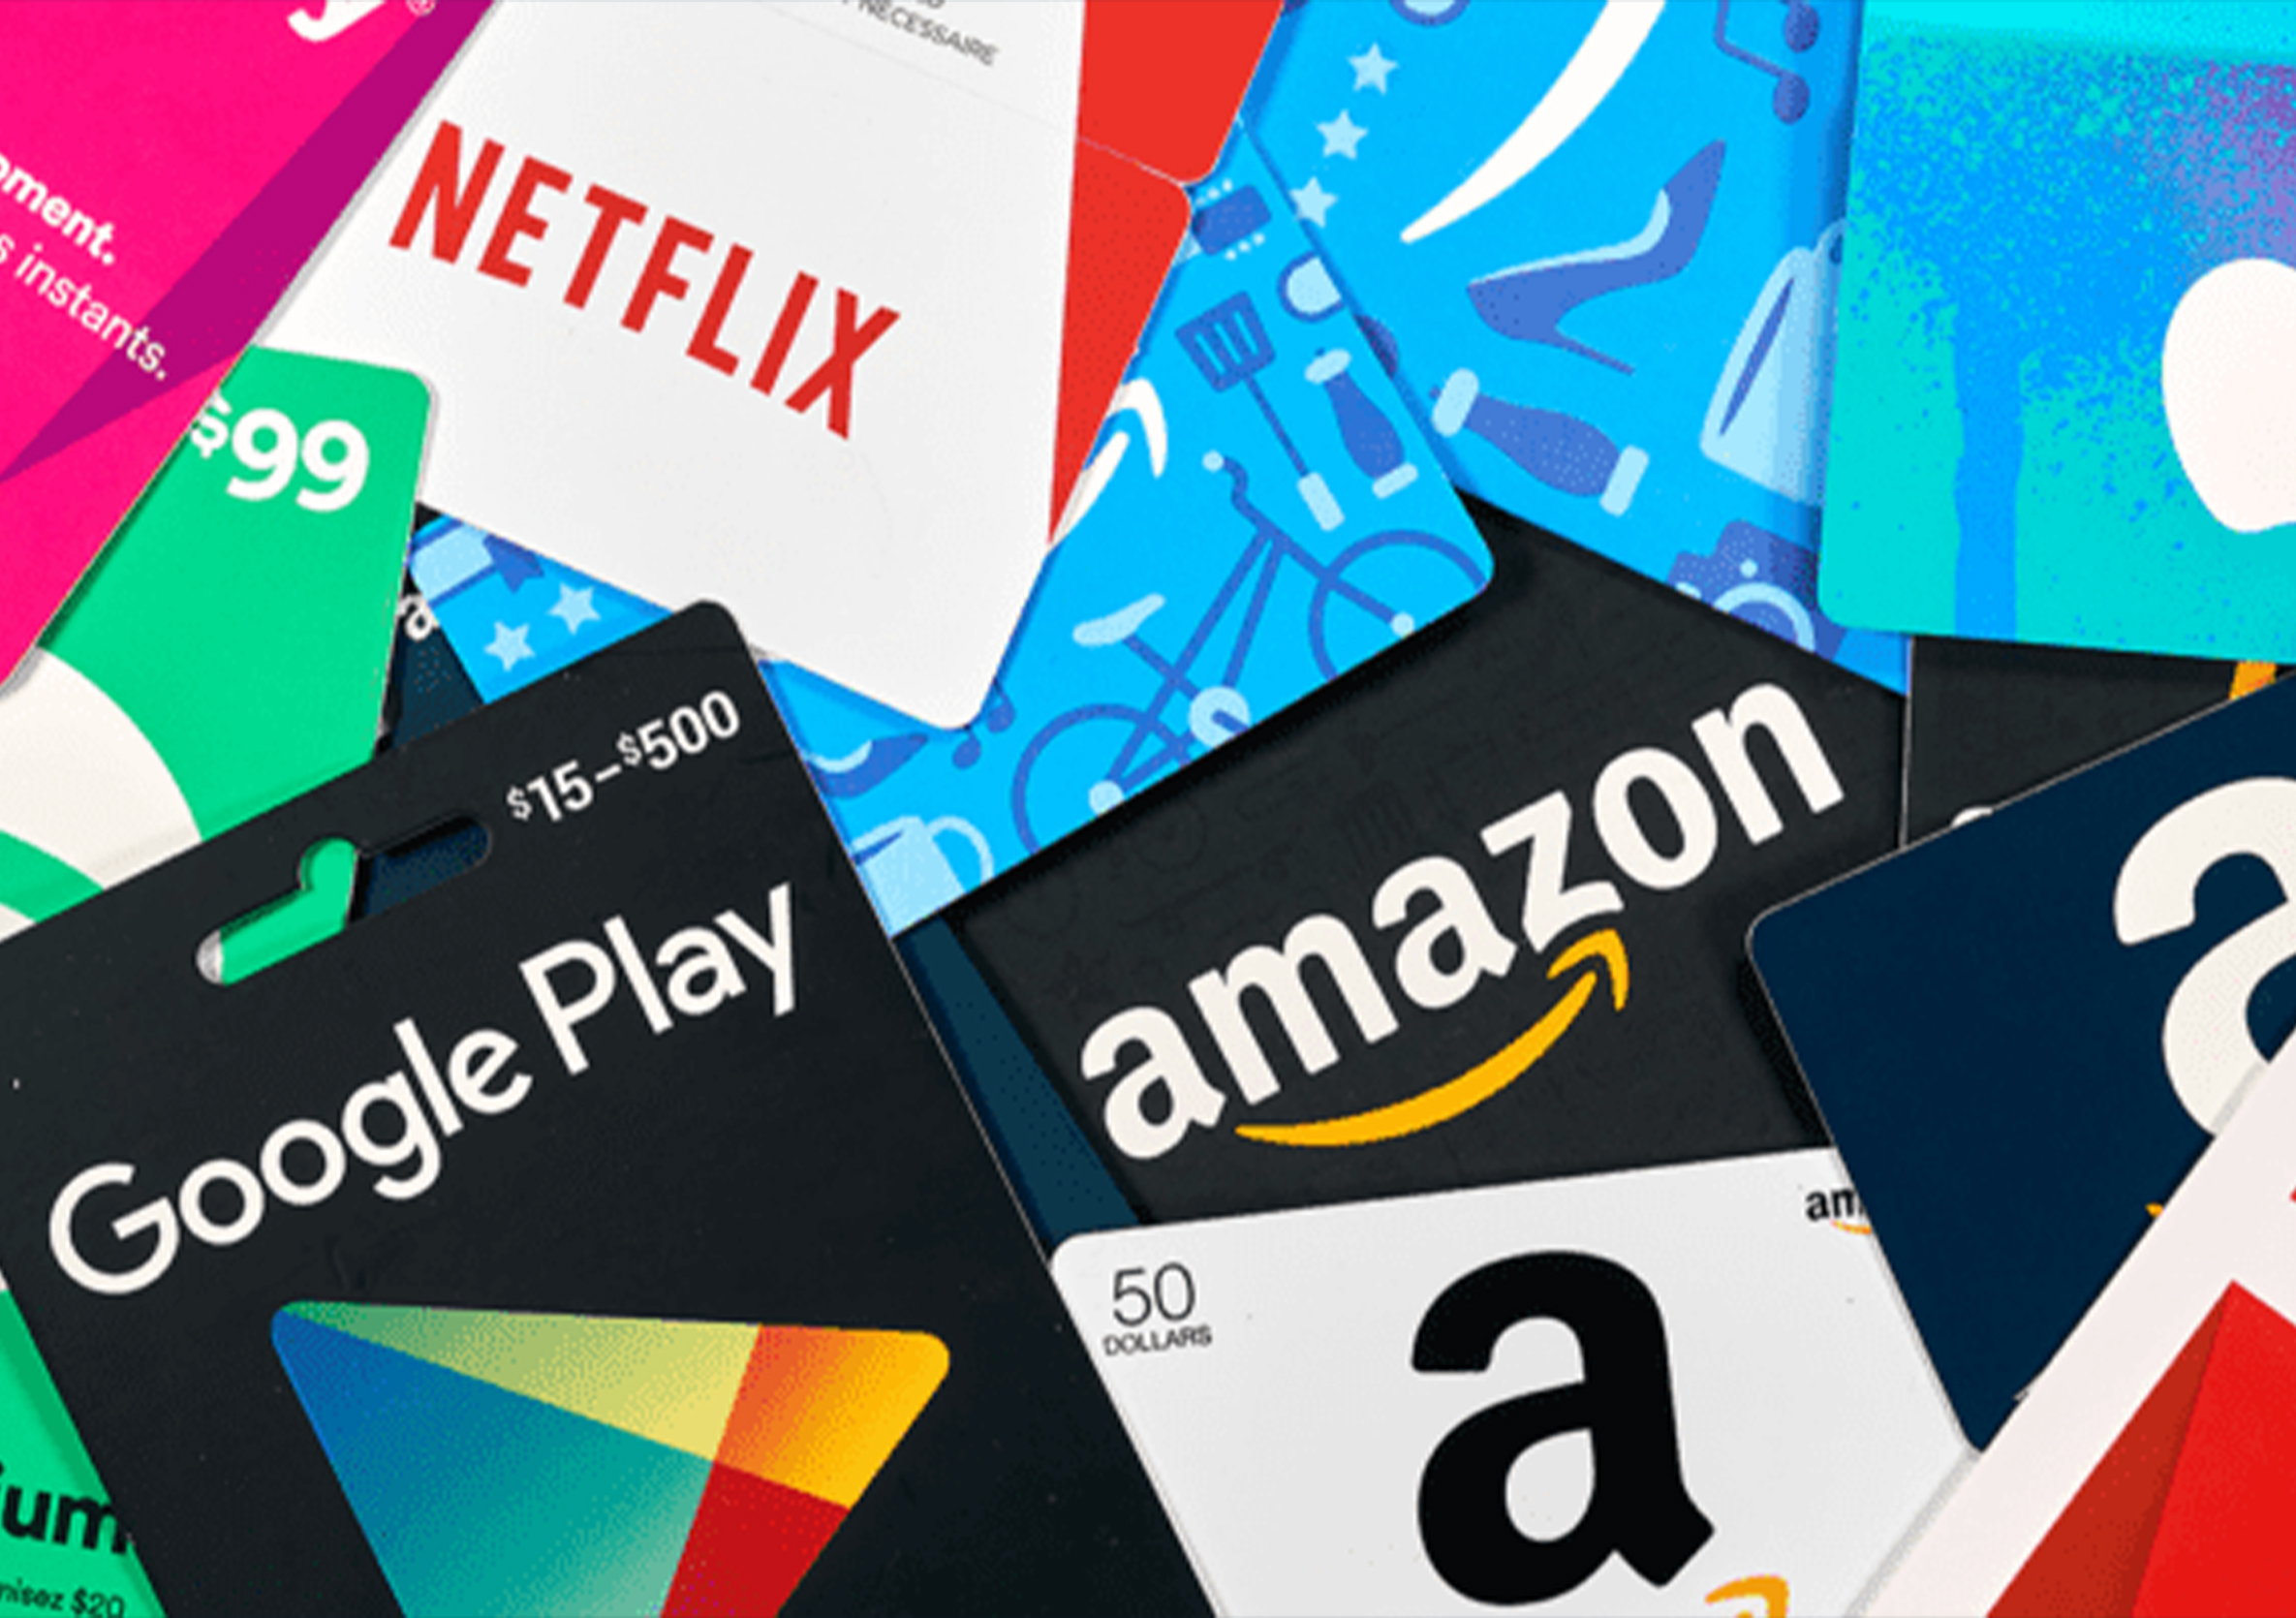 Top 8 Most Popular Nigerian Gift Cards 2023 - Cardtonic